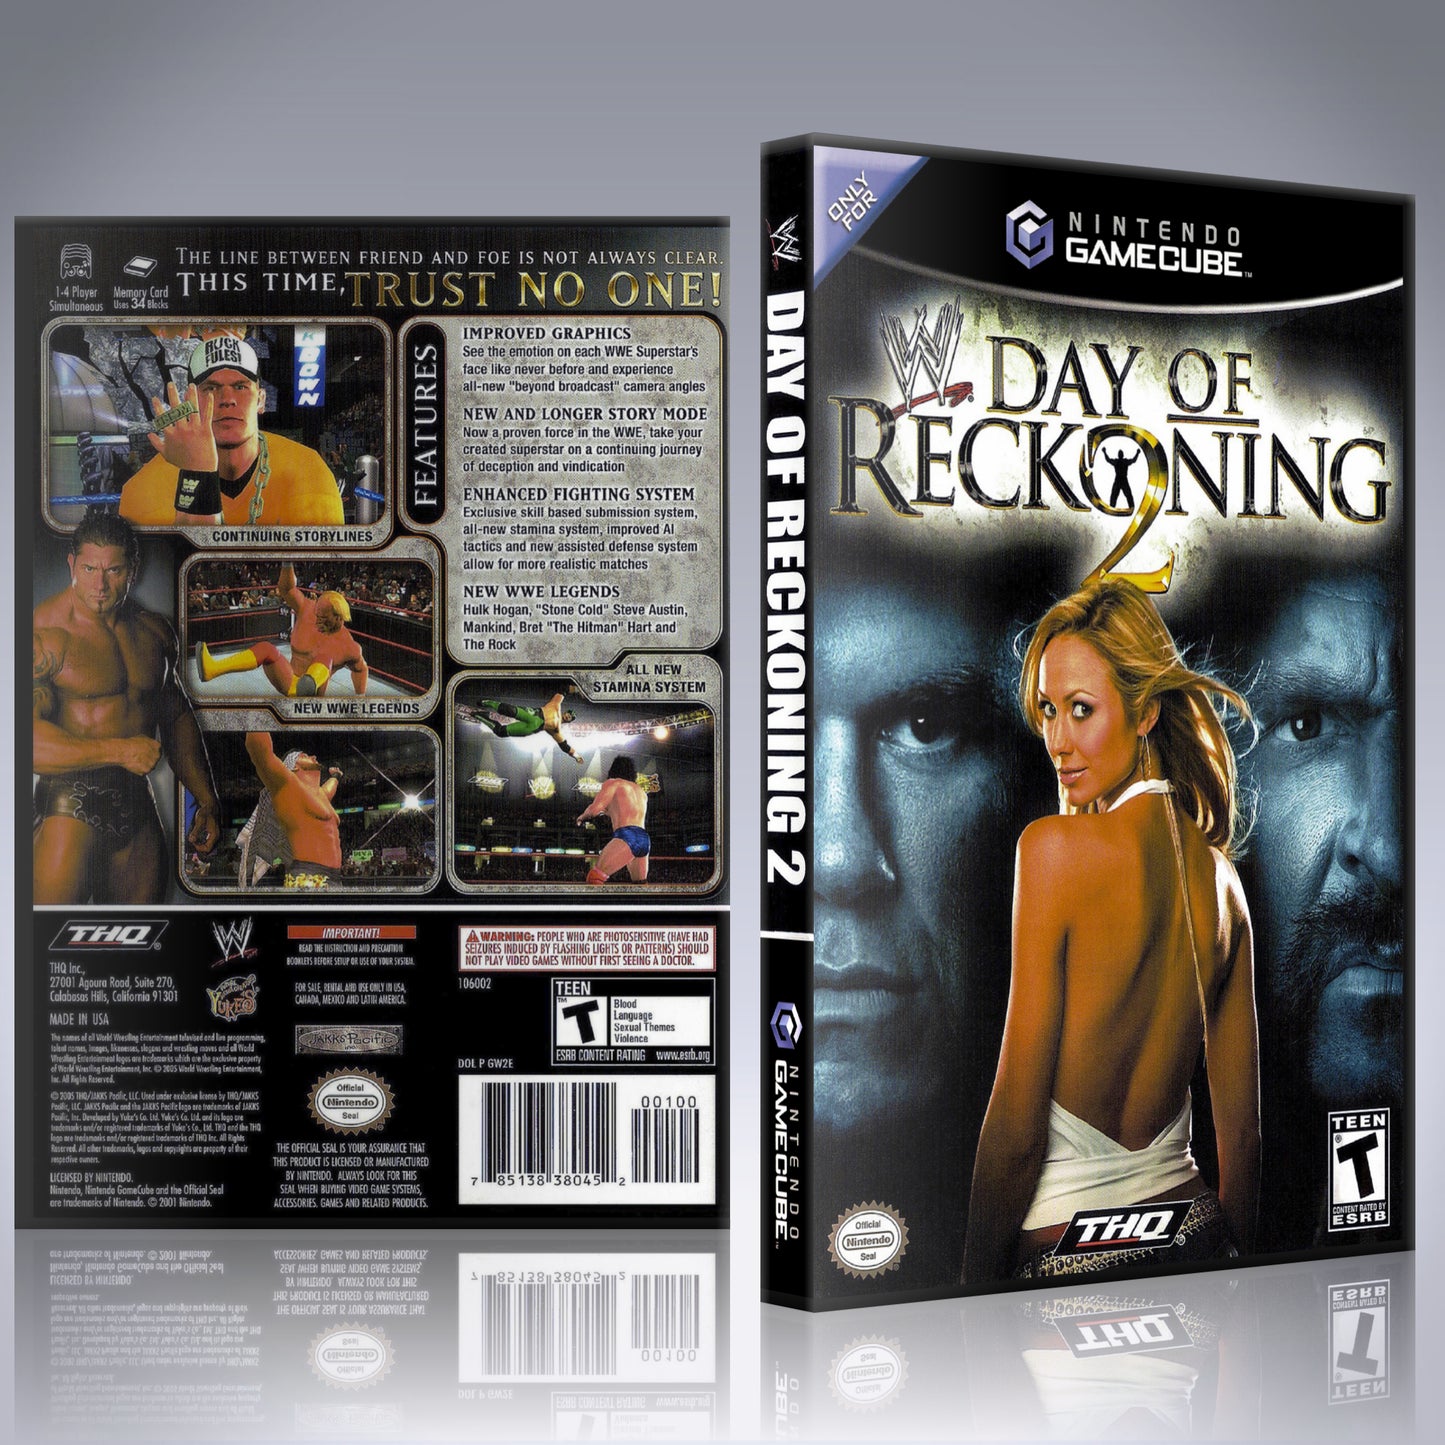 GameCube Replacement Case - NO GAME - WWE Day of Reckoning 2